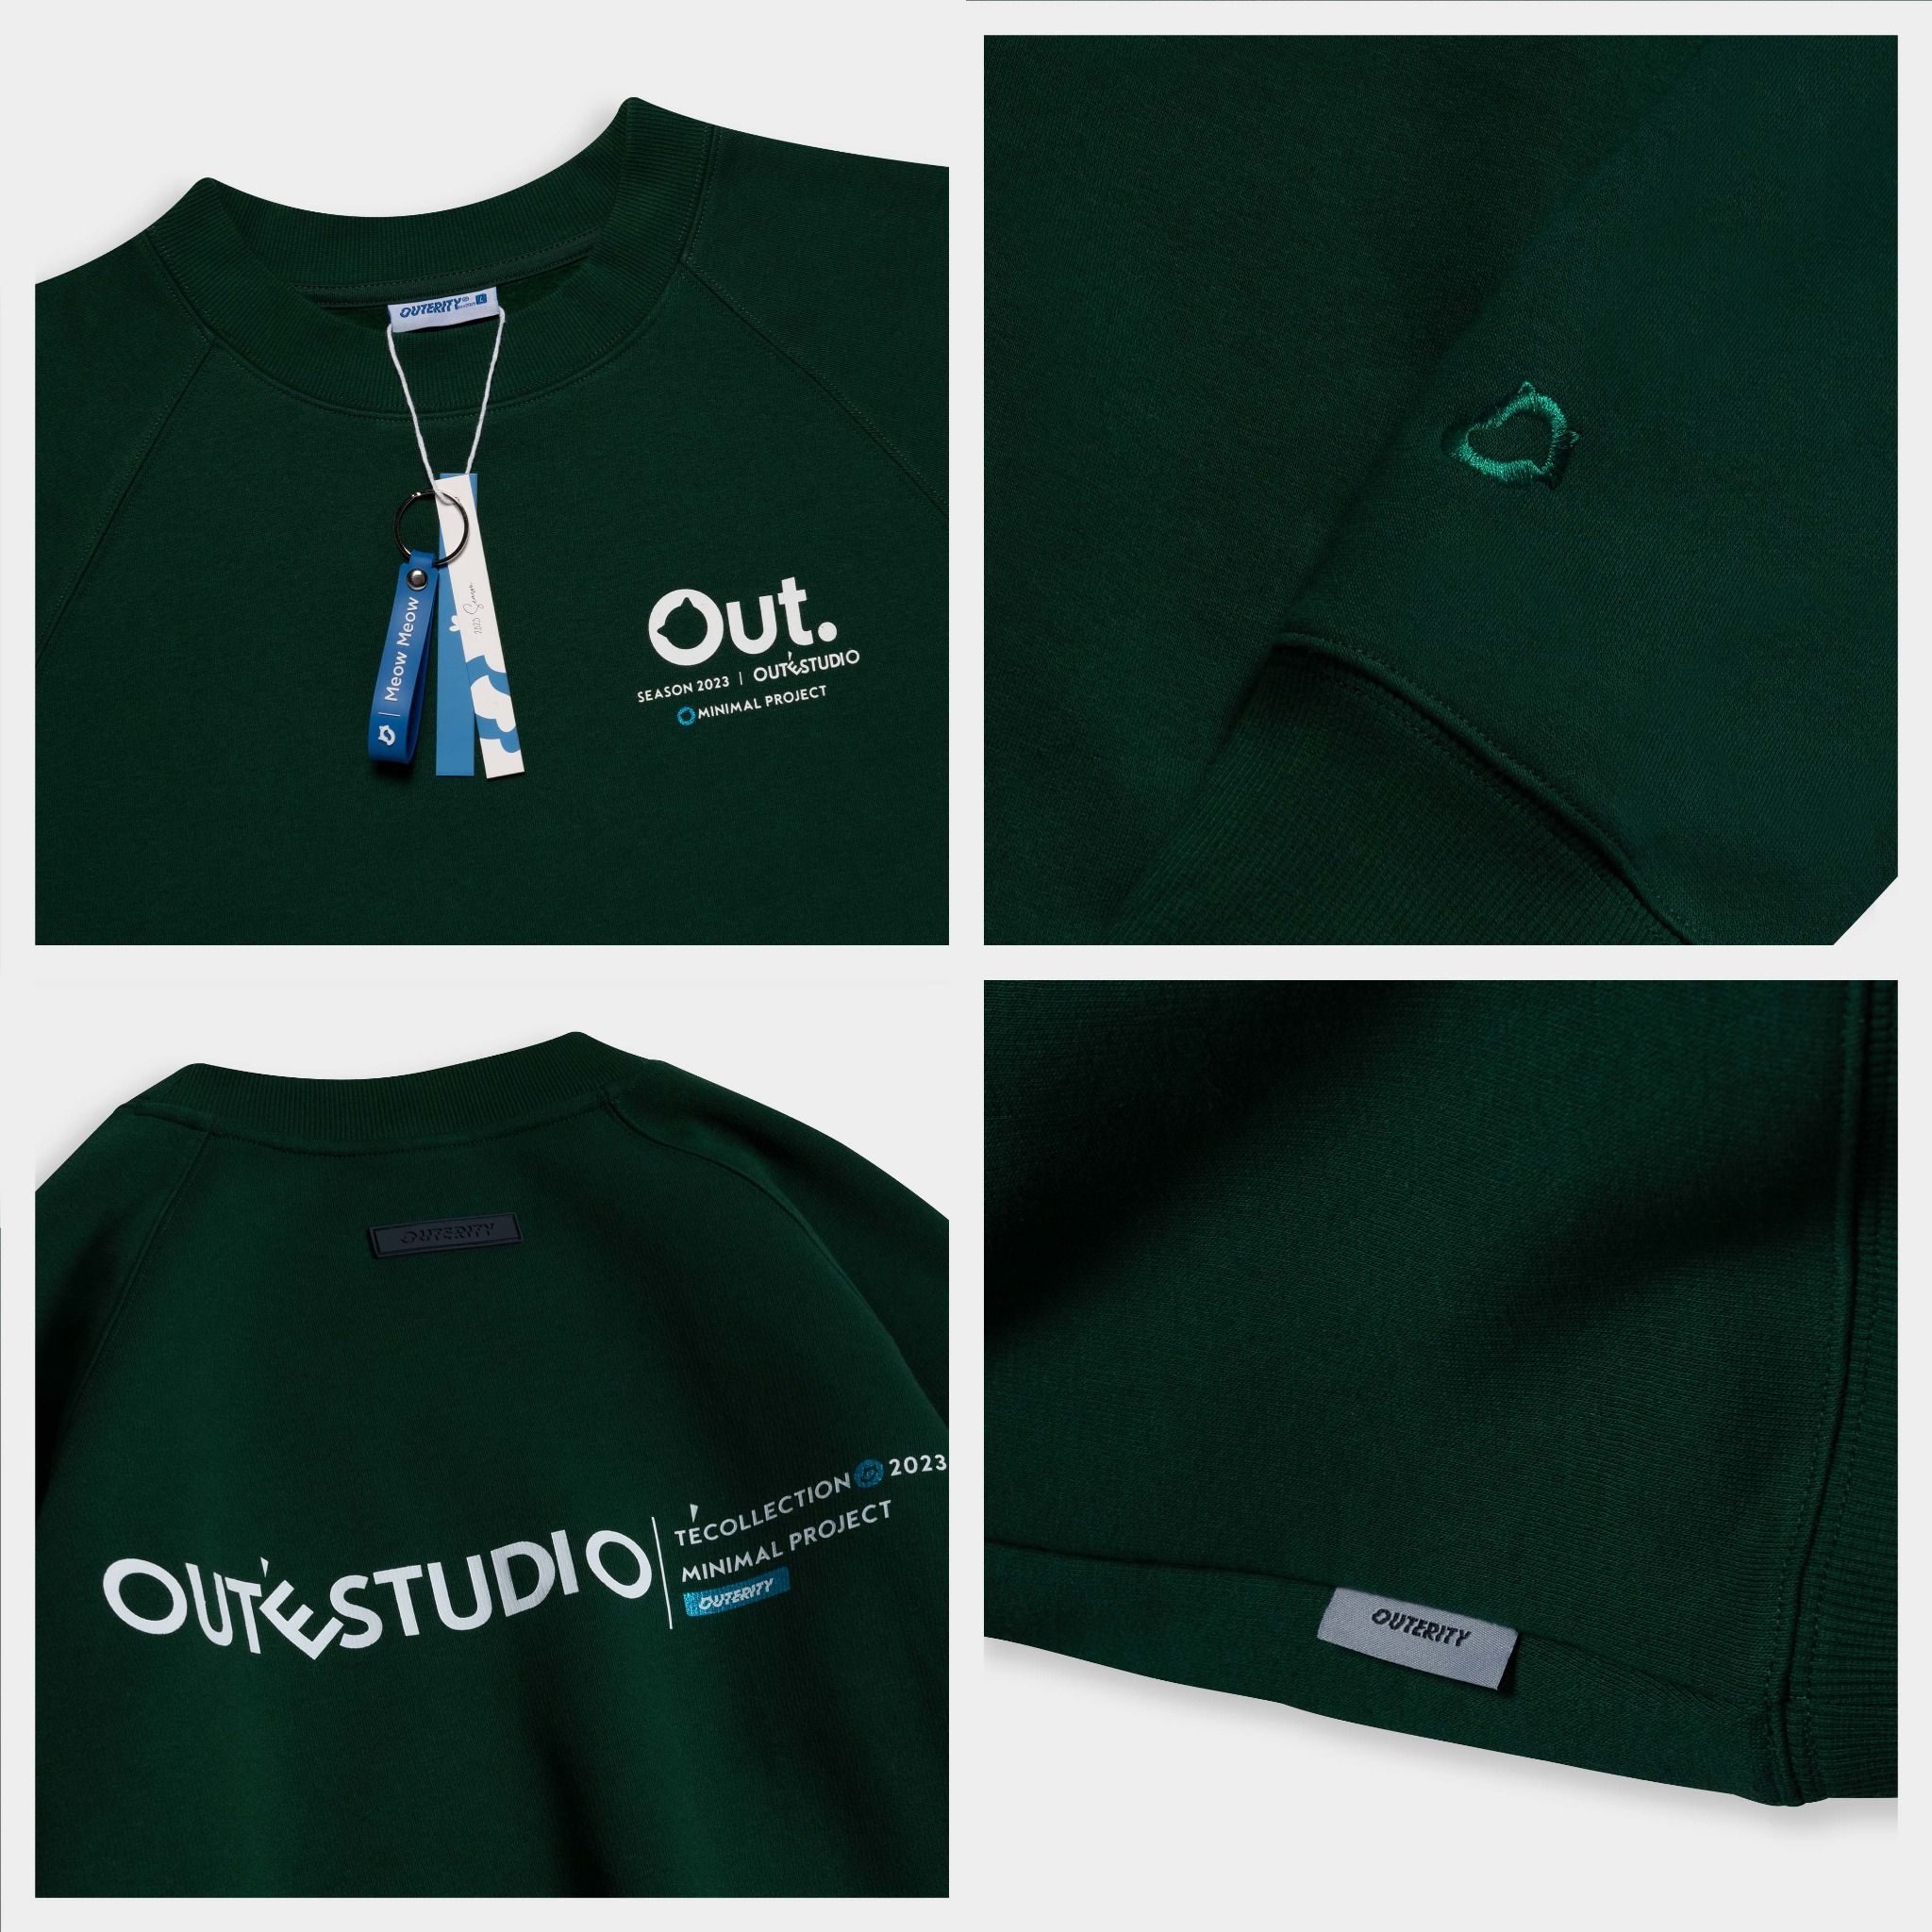  Outerity Sweater Collection TÉ / Green 